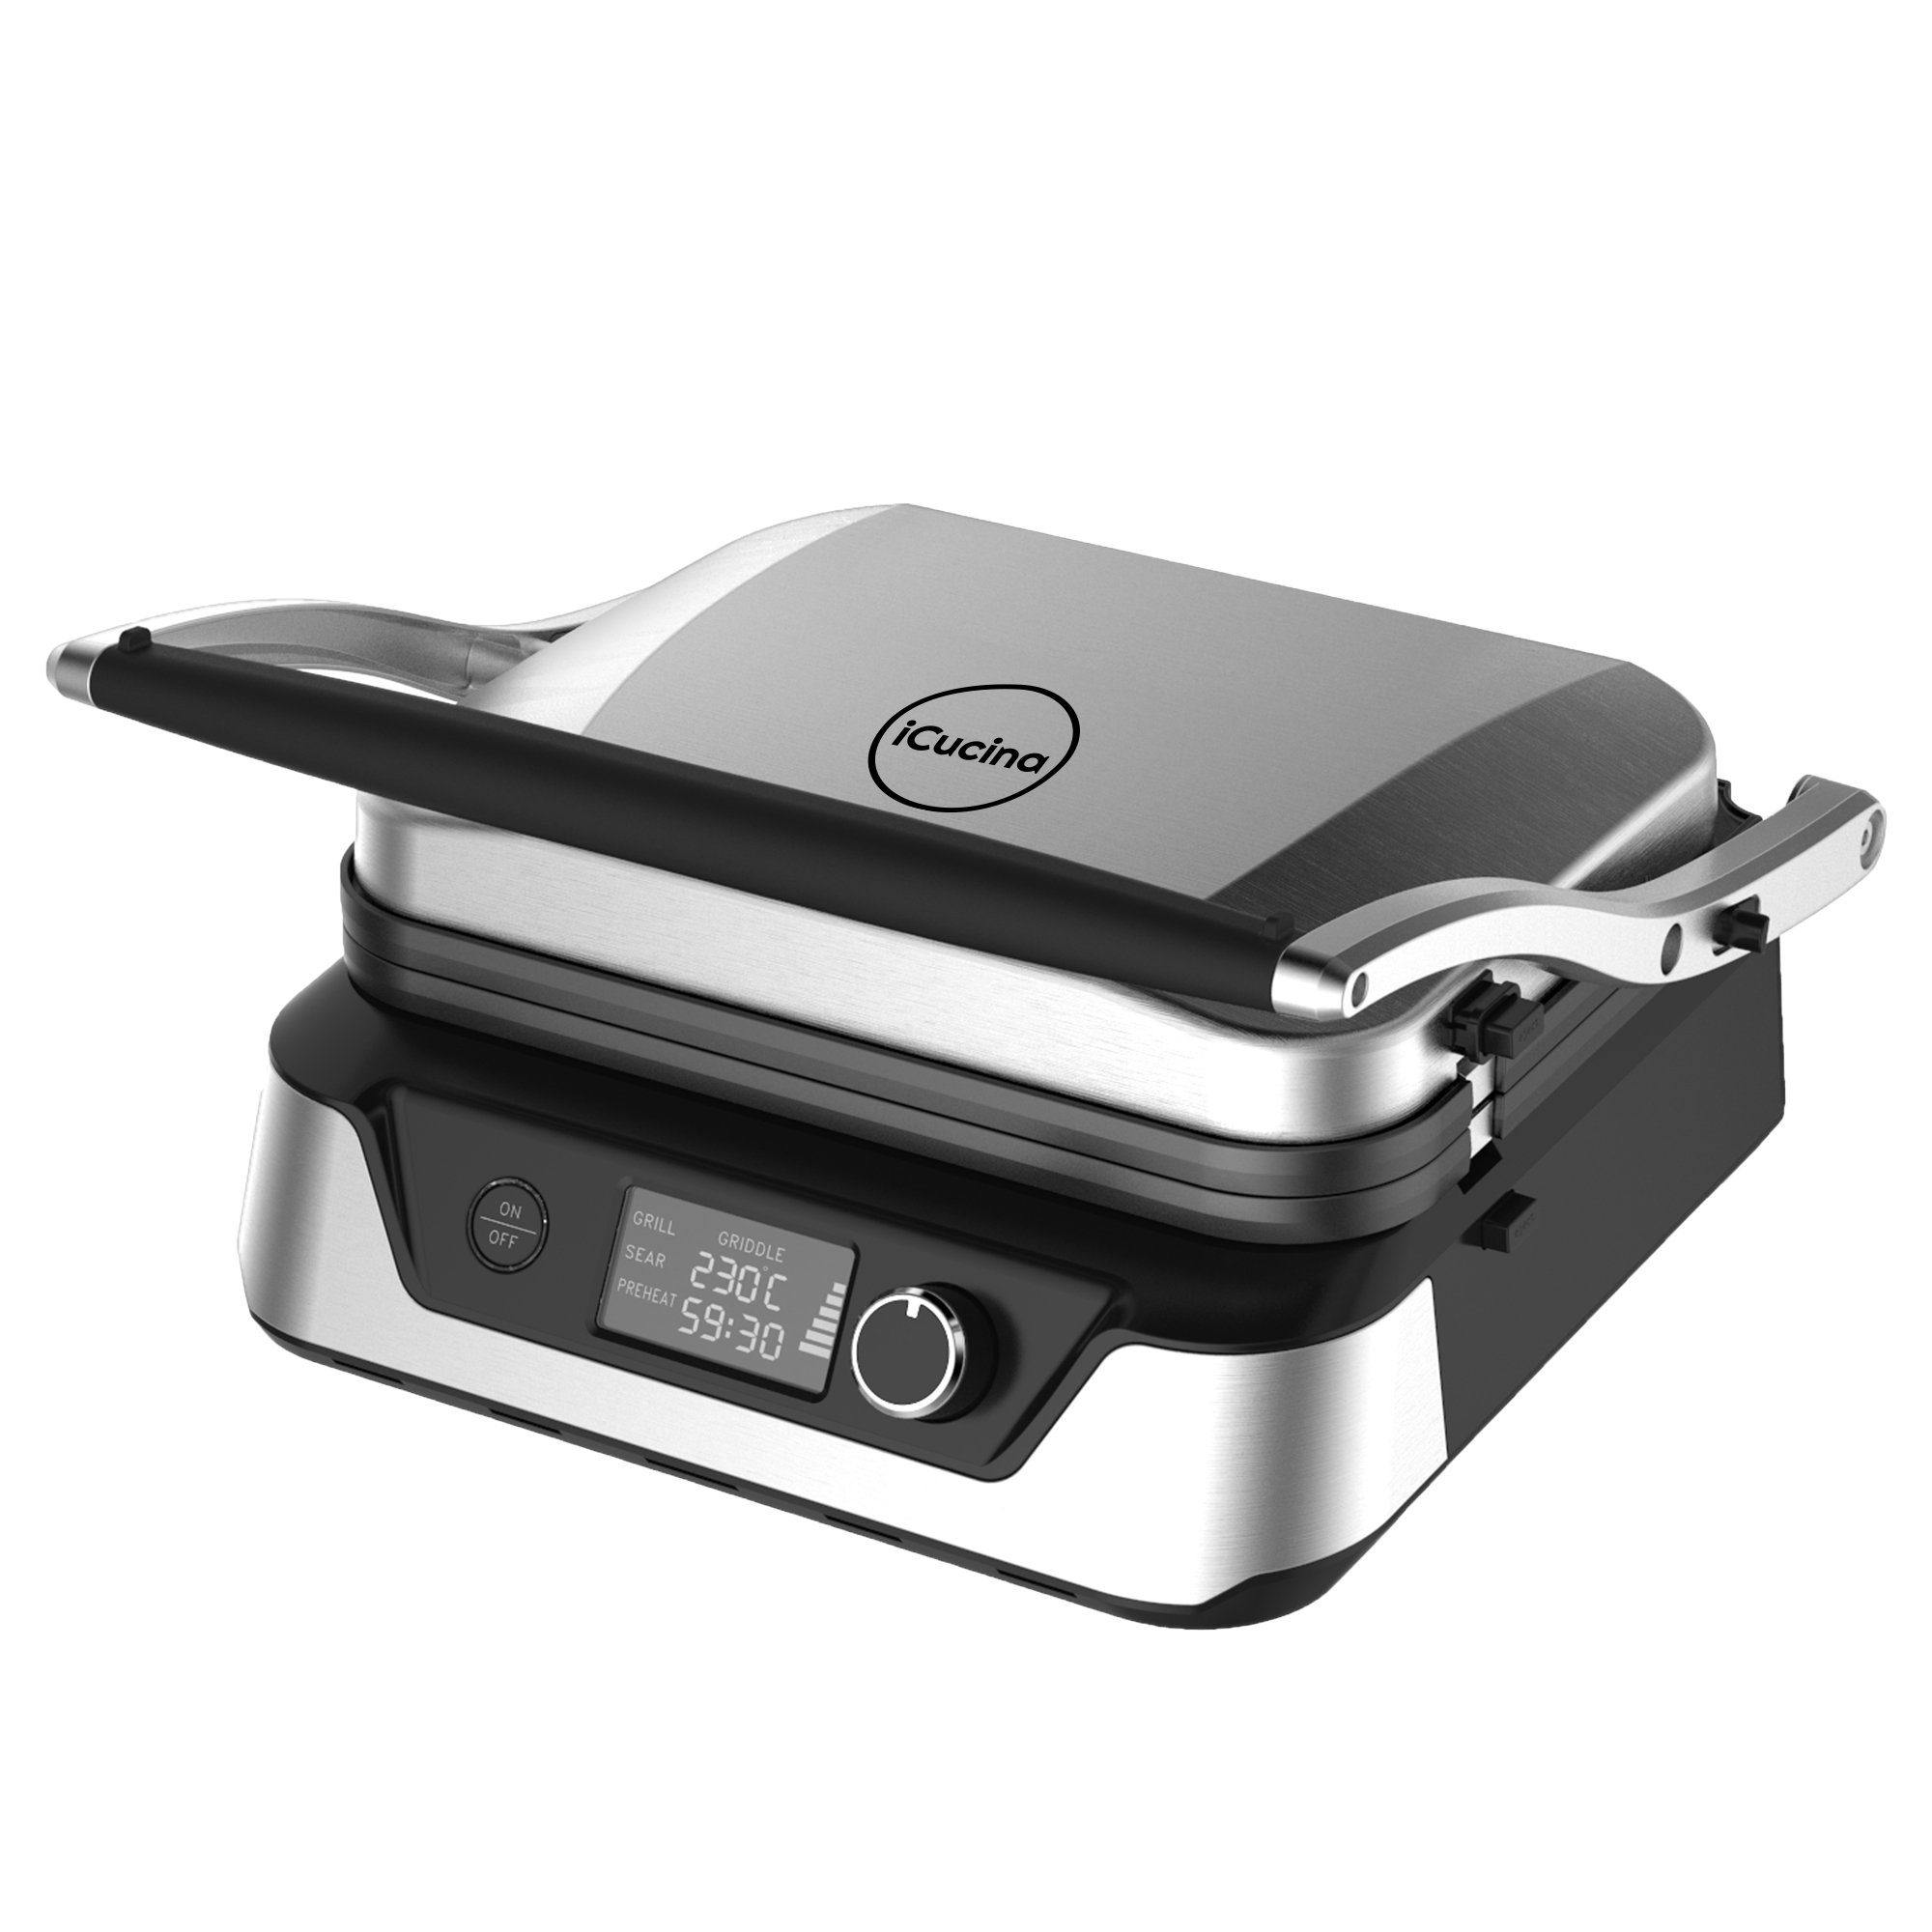 T-Fal Grilled Cheese Griddle: Fast, Nonstick Cooking - Real Food Traveler